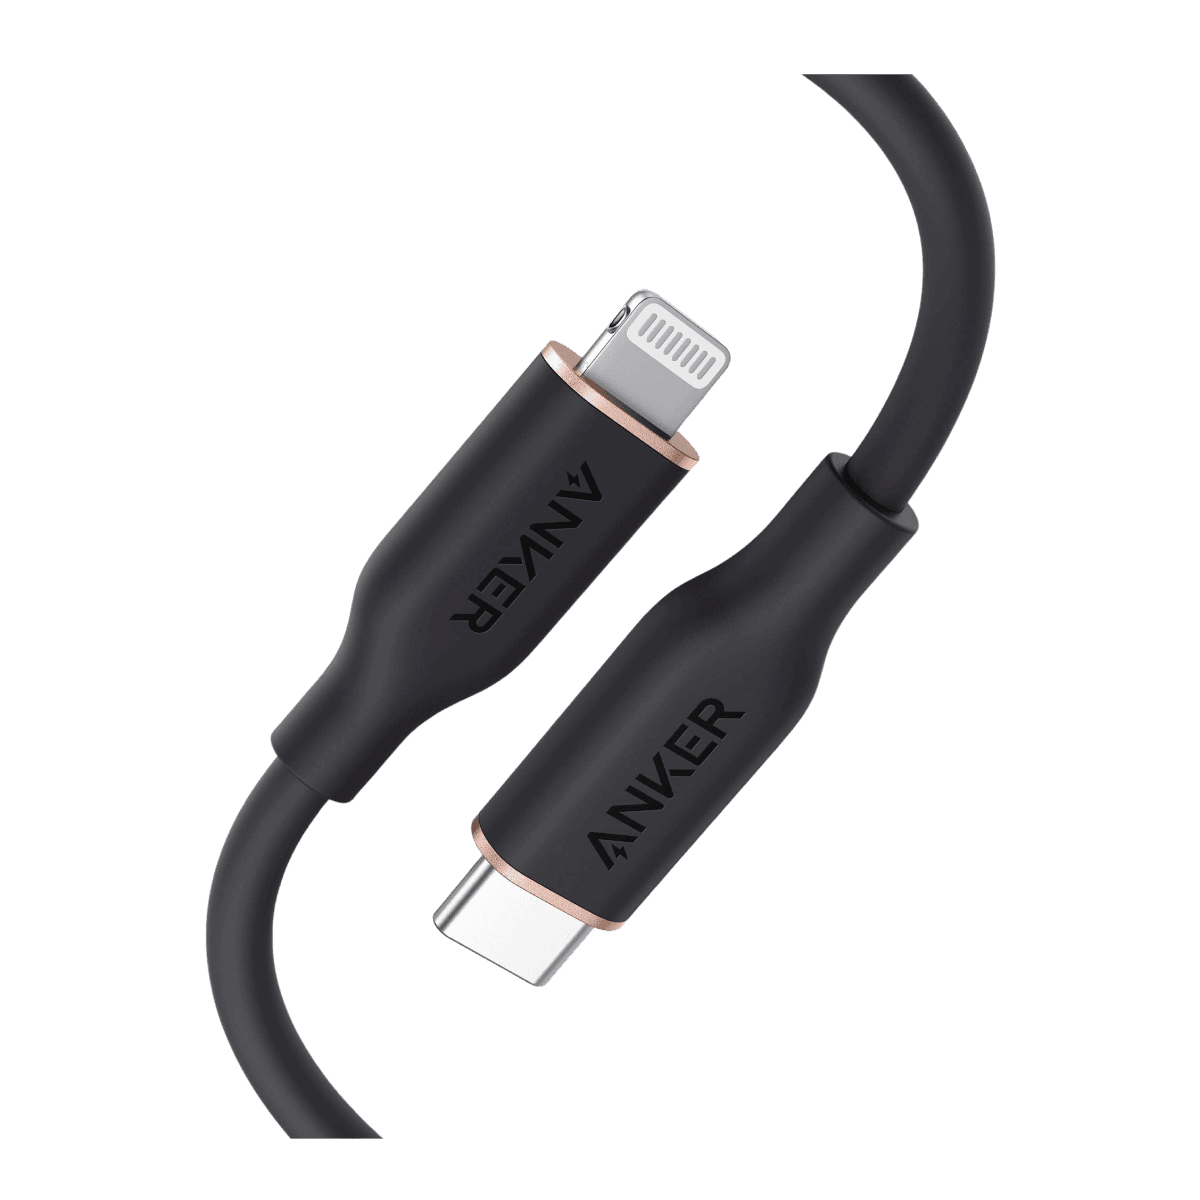 Anker <b>641</b> USB-C to Lightning Cable (Flow, 6ft Silicone)